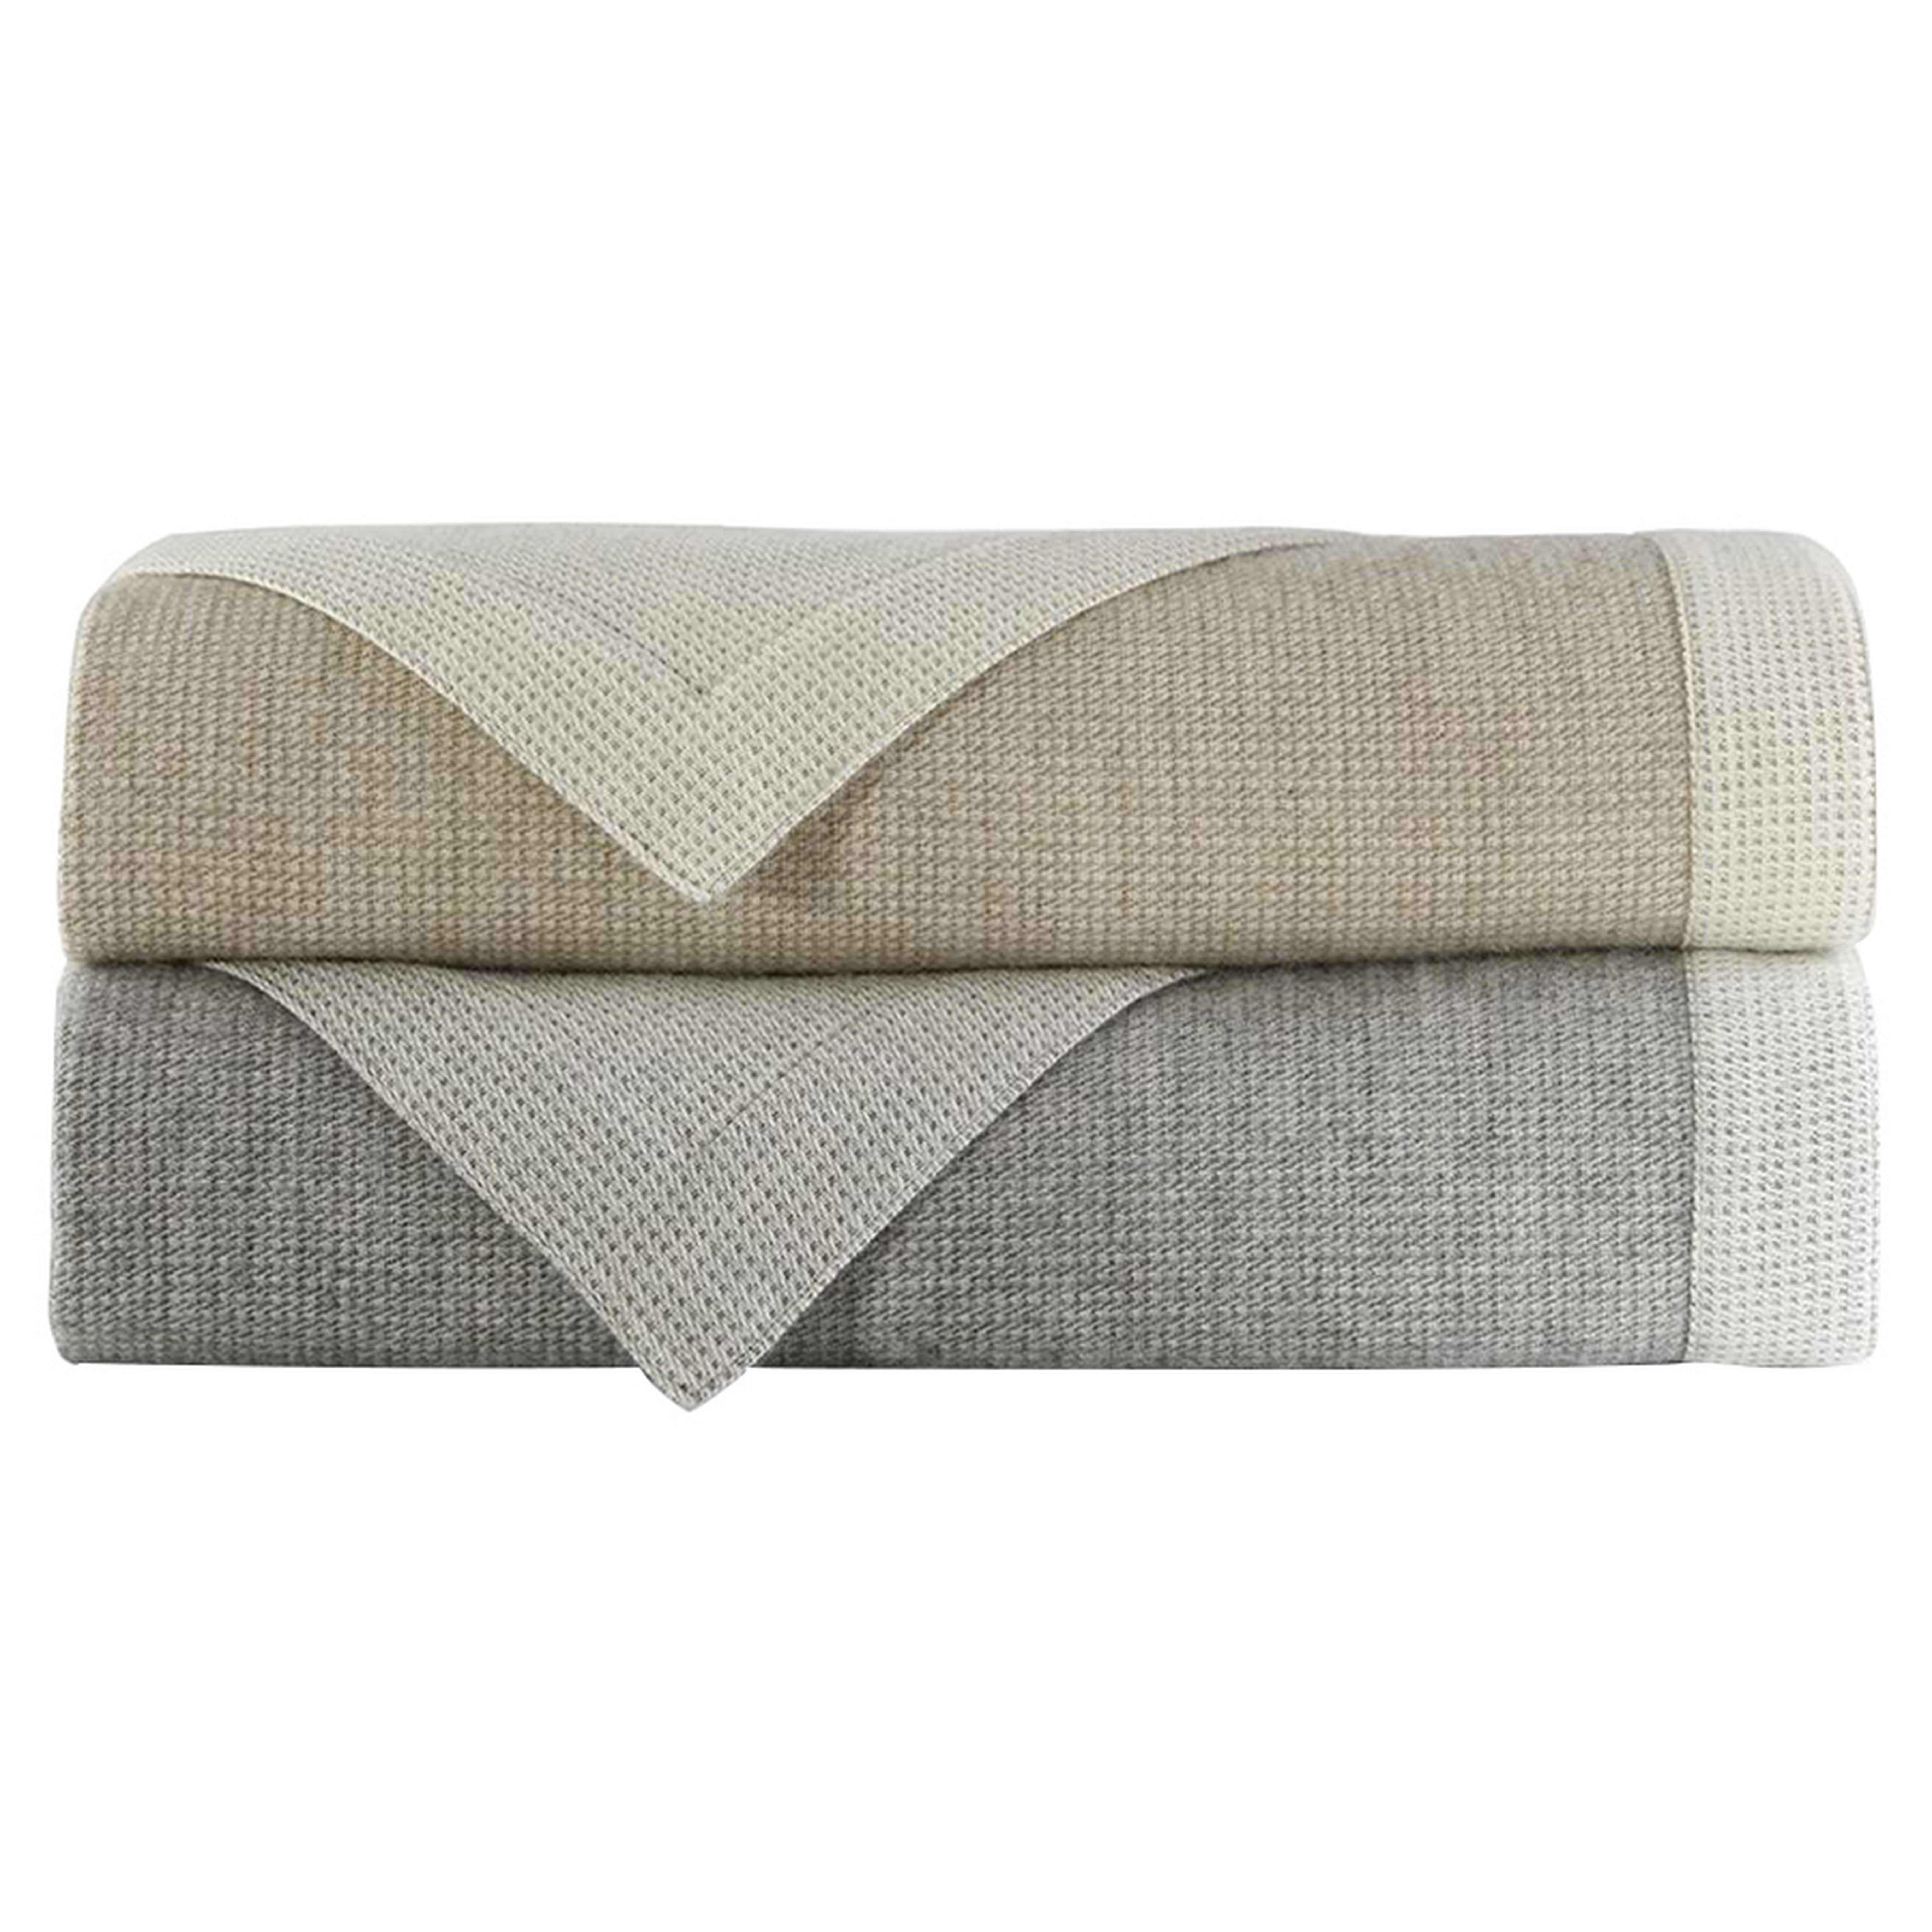 Peacock Alley Modern Angelo Reversible Blanket - Linen King - Kathy Kuo Home